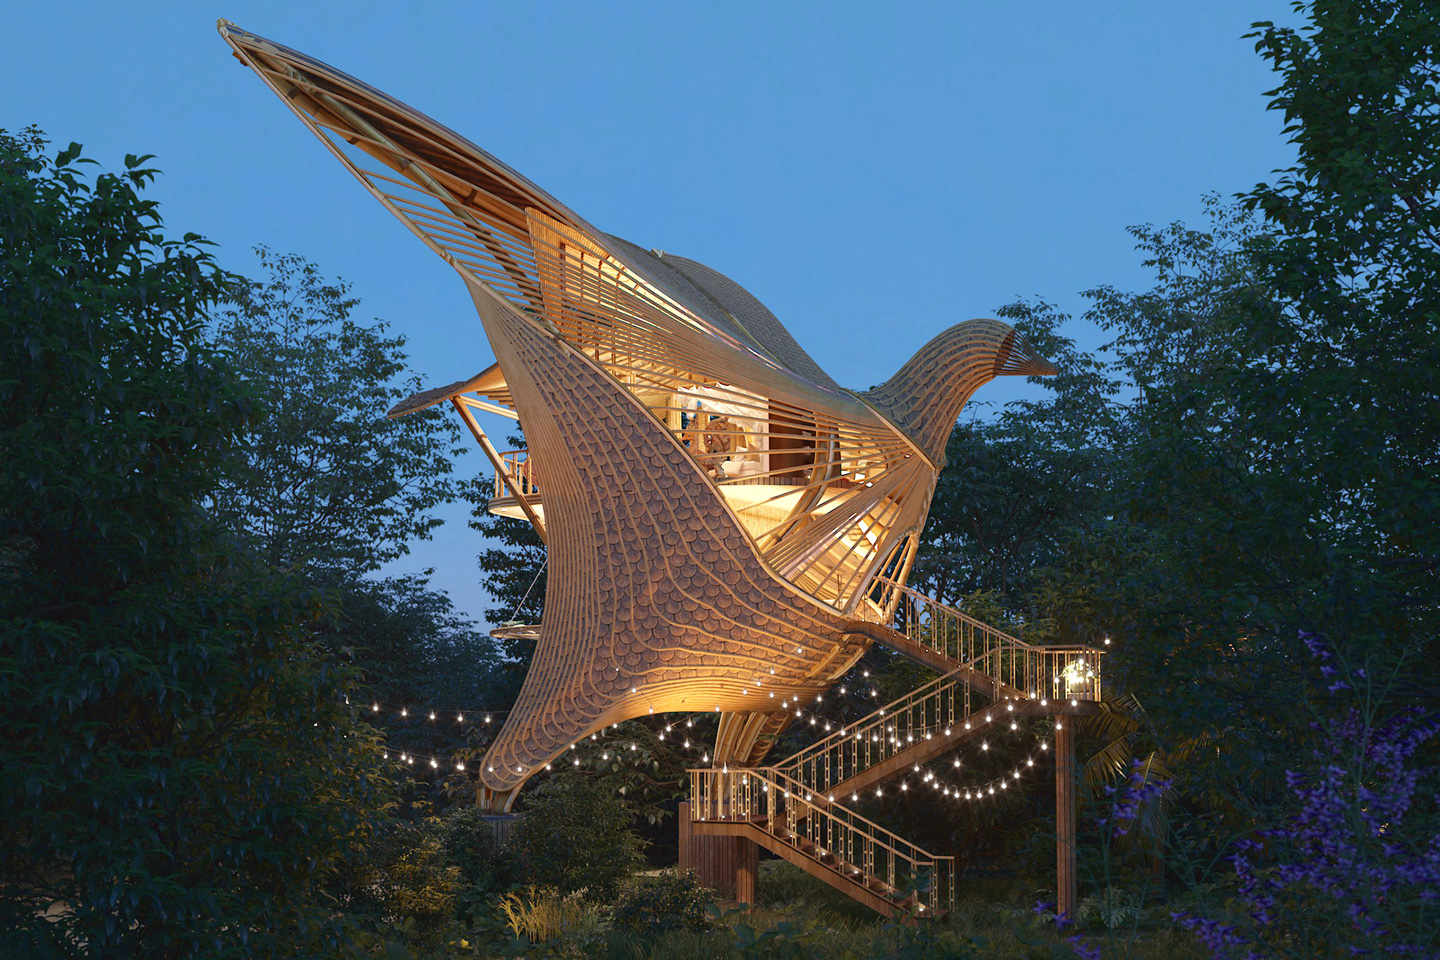 #Picturesque bamboo glamping villa looks like a large graceful bird in flight